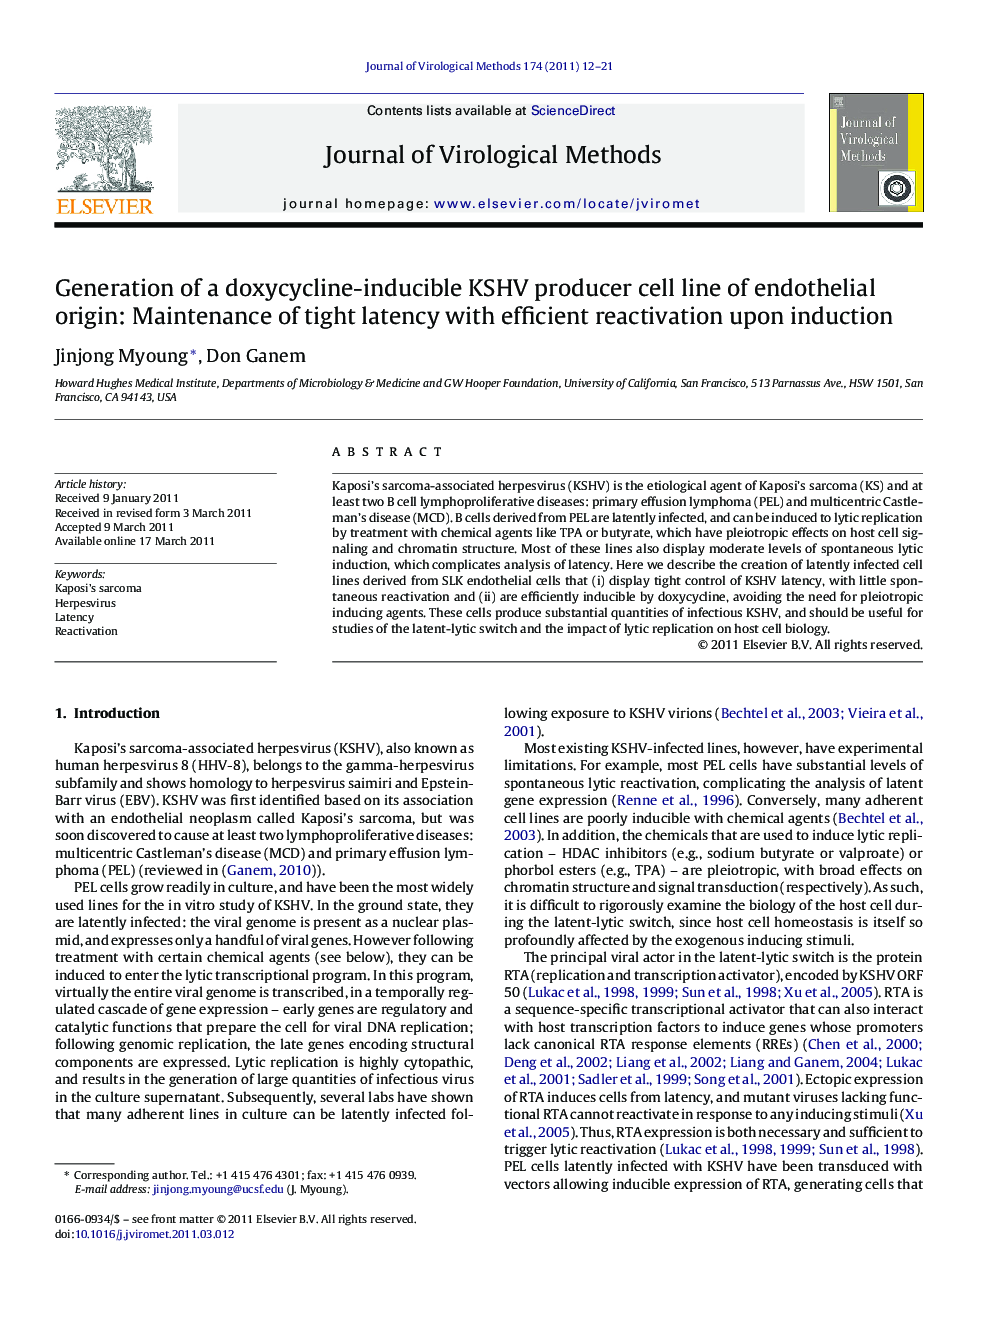 Generation of a doxycycline-inducible KSHV producer cell line of endothelial origin: Maintenance of tight latency with efficient reactivation upon induction